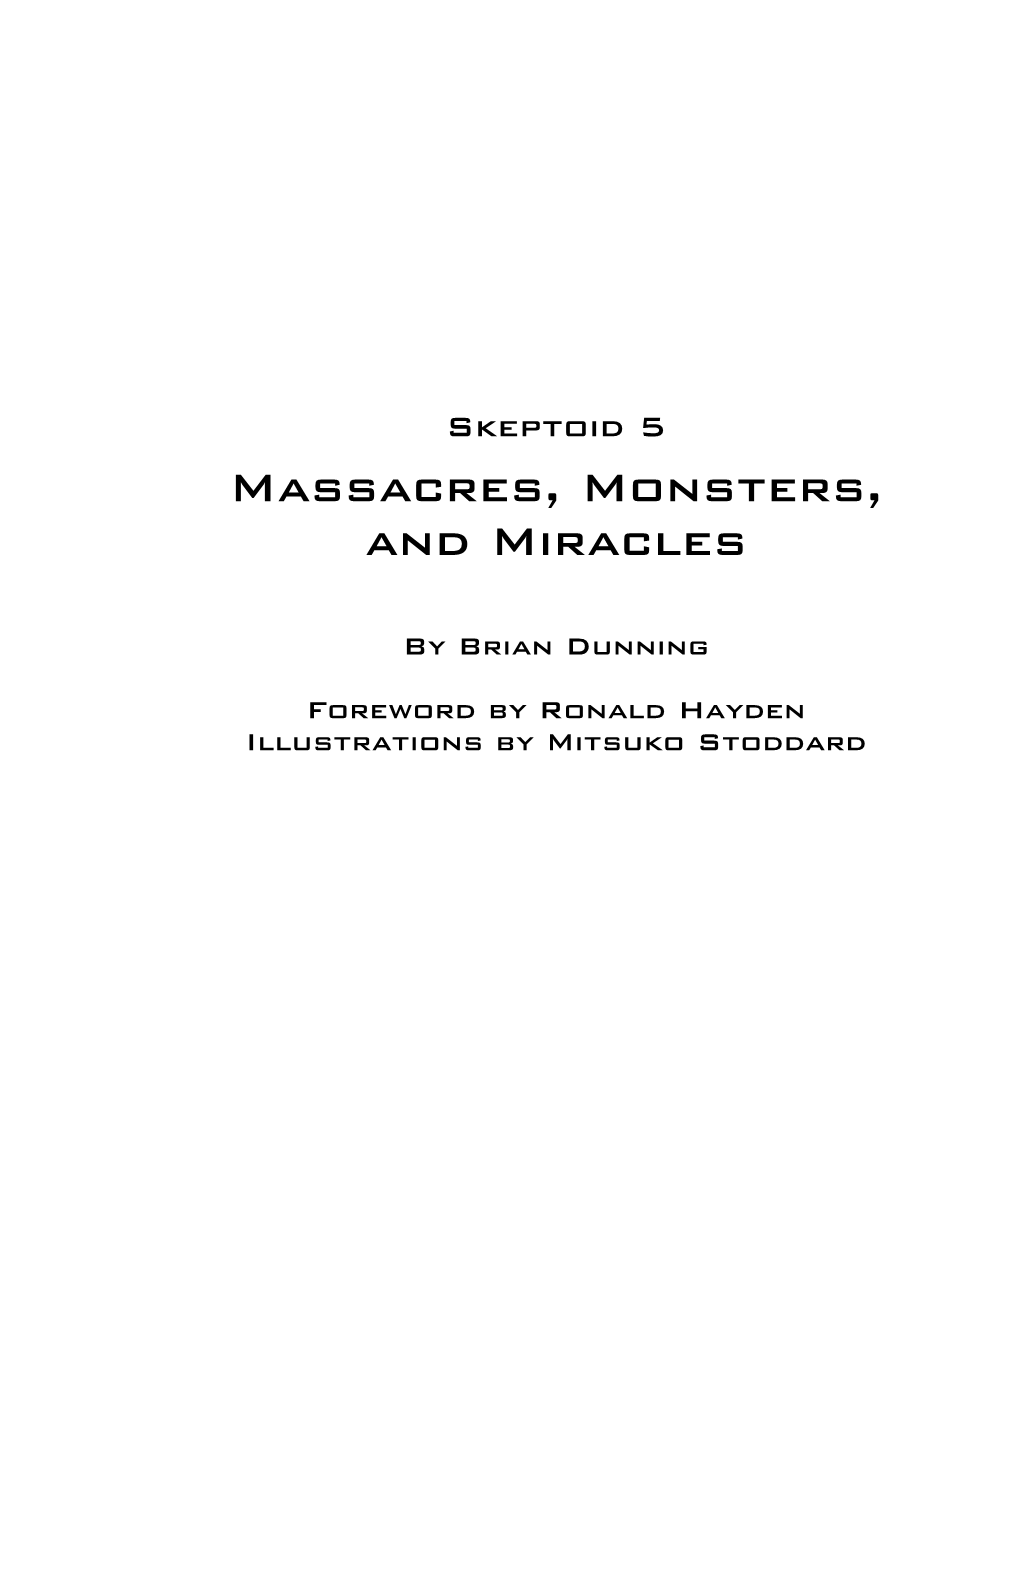 Massacres, Monsters, and Miracles